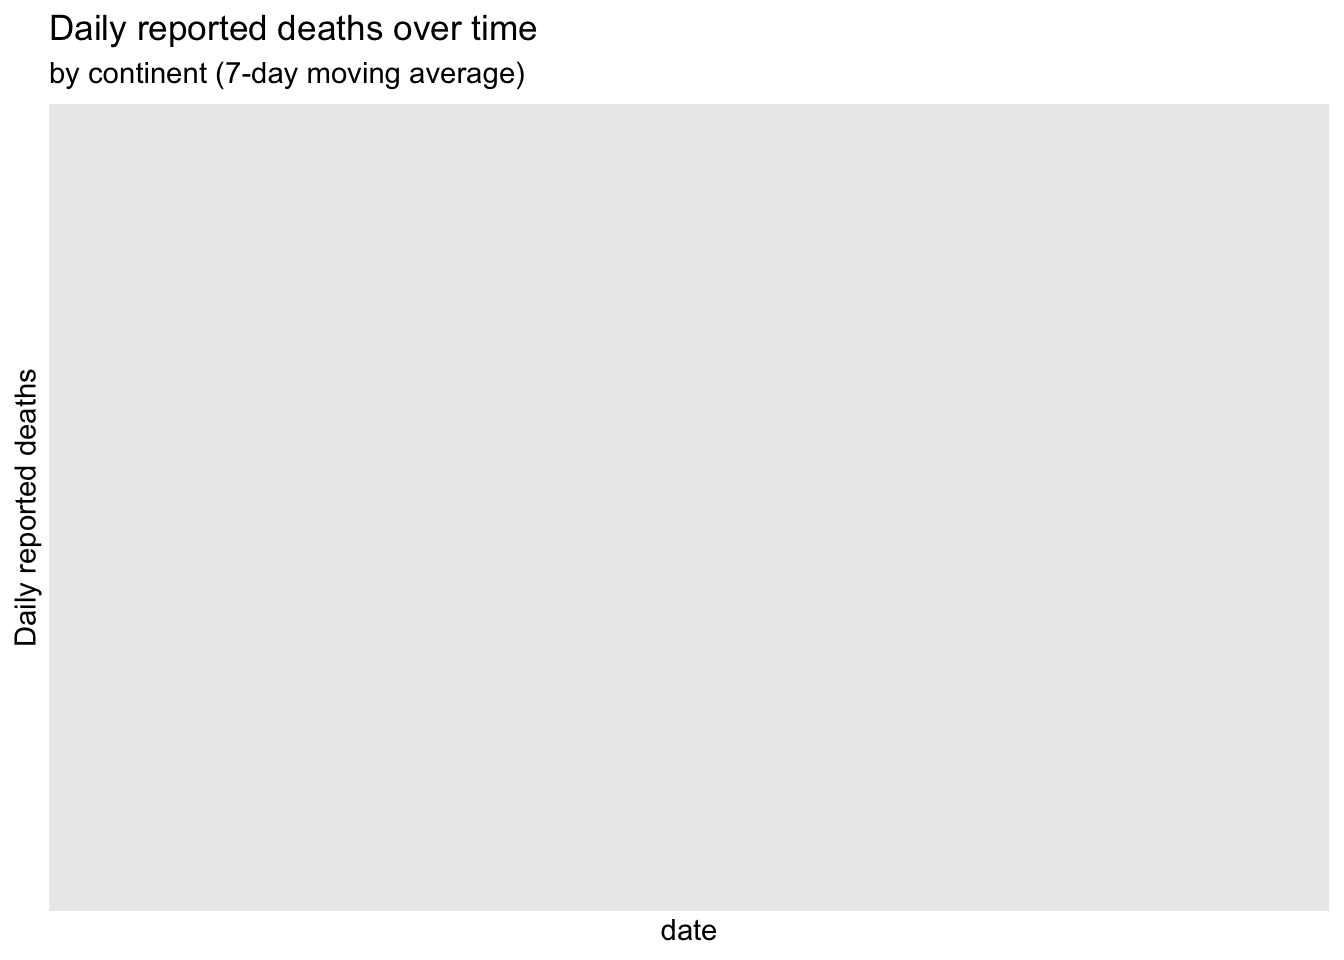 Worldwide daily reported deaths by continent (seven day moving average)